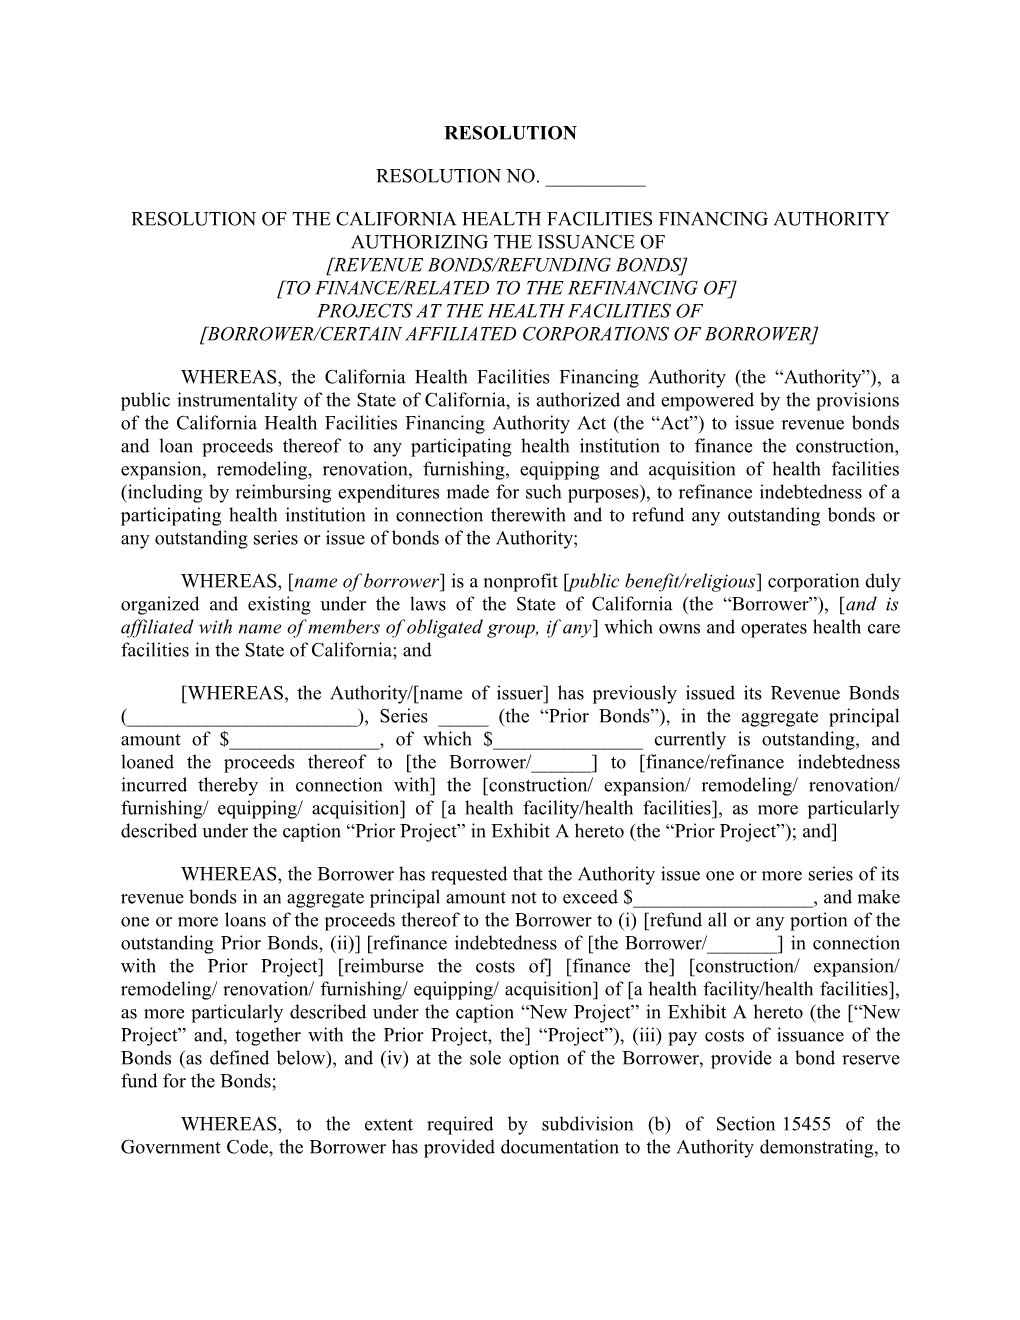 Resolution of the California Health Facilities Financing Authority Authorizing the Issuance